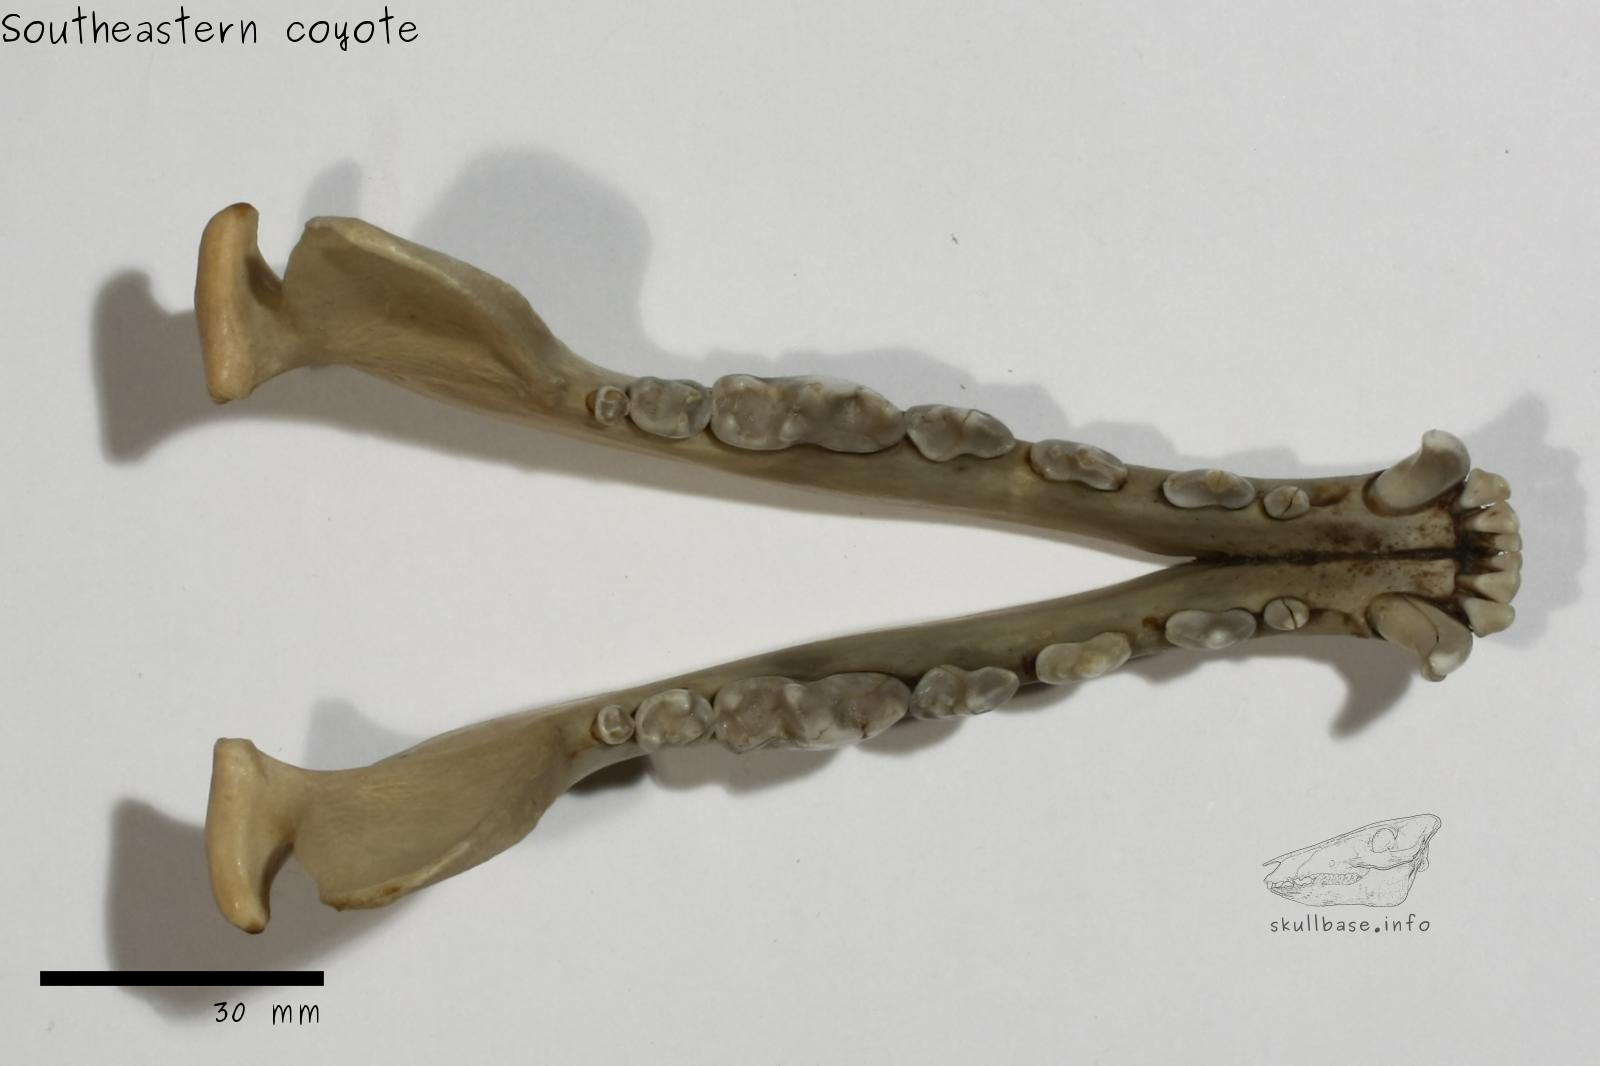 Southeastern coyote (Canis latrans frustor) jaw